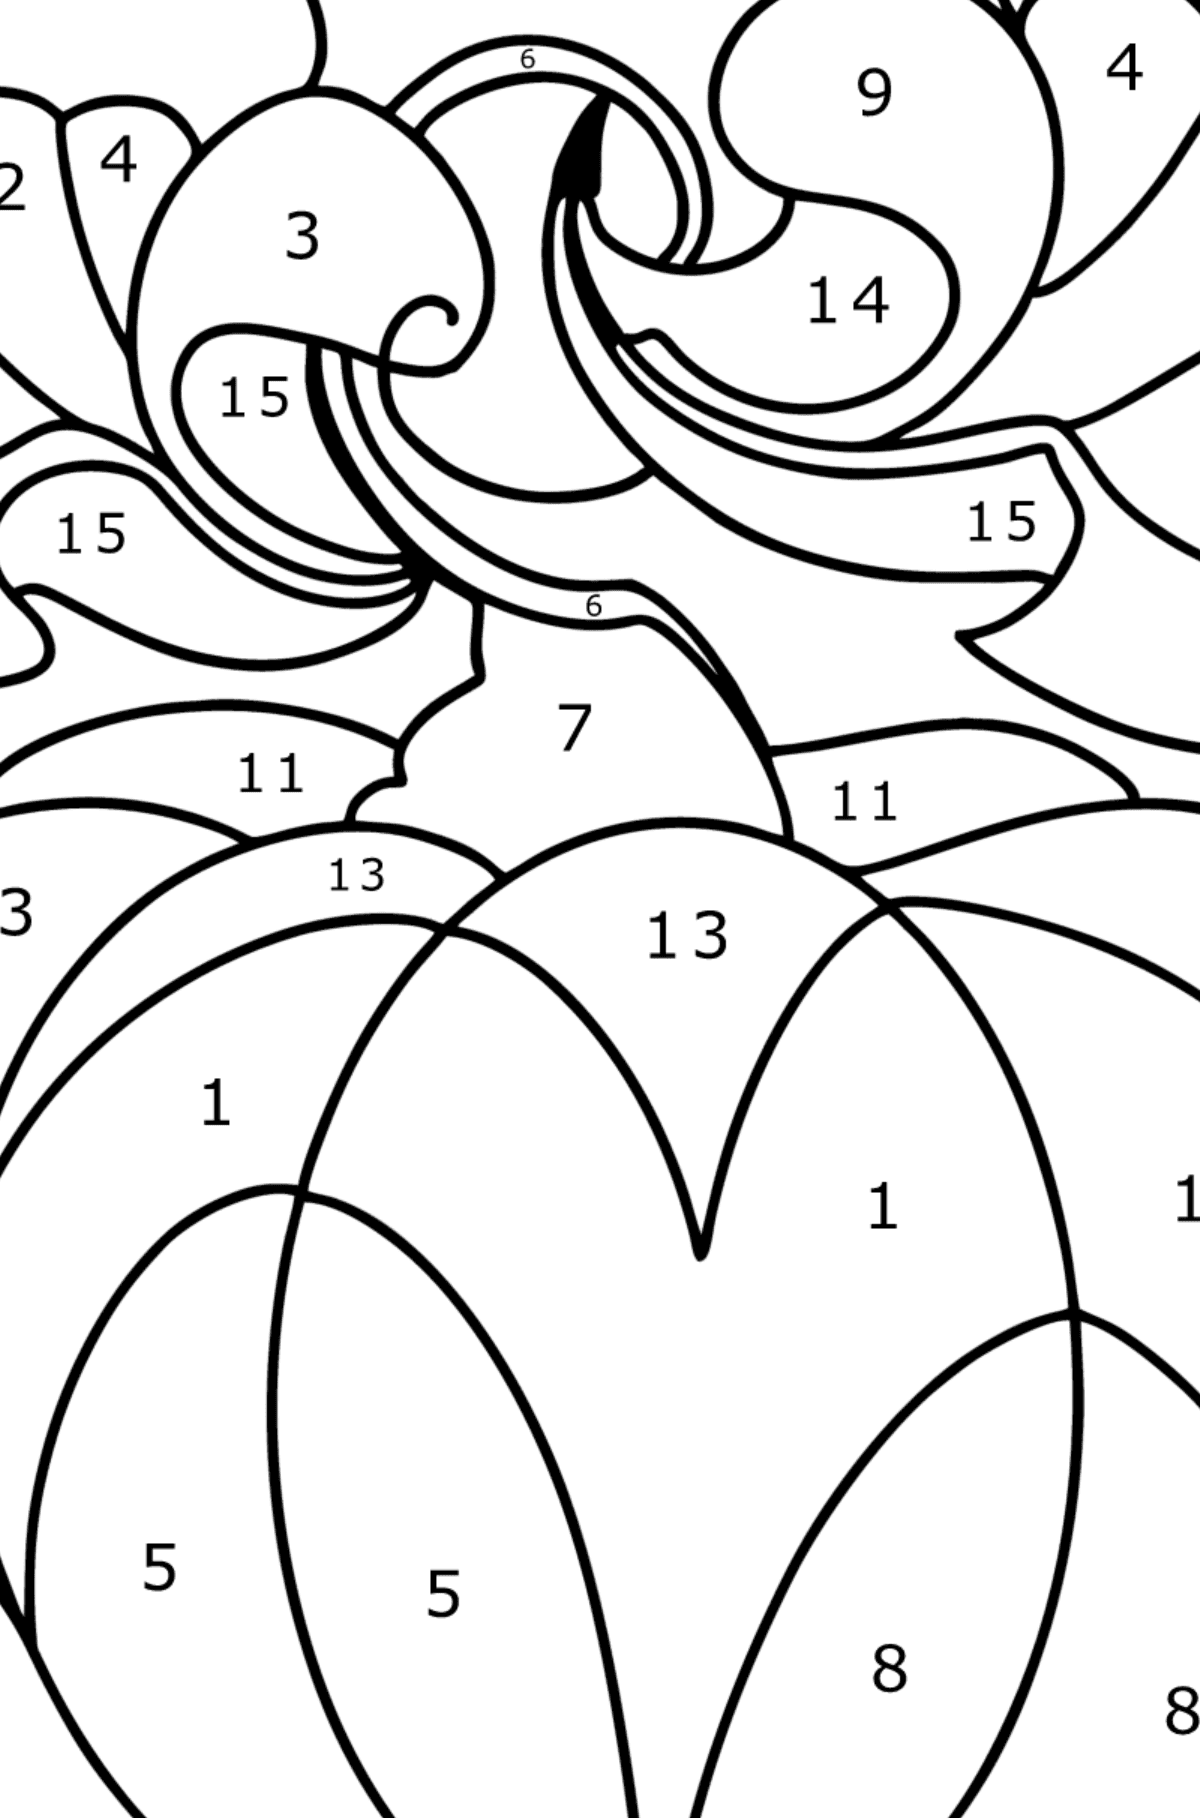 Coloring Pages For Kids   Printable for Free, and Color Online